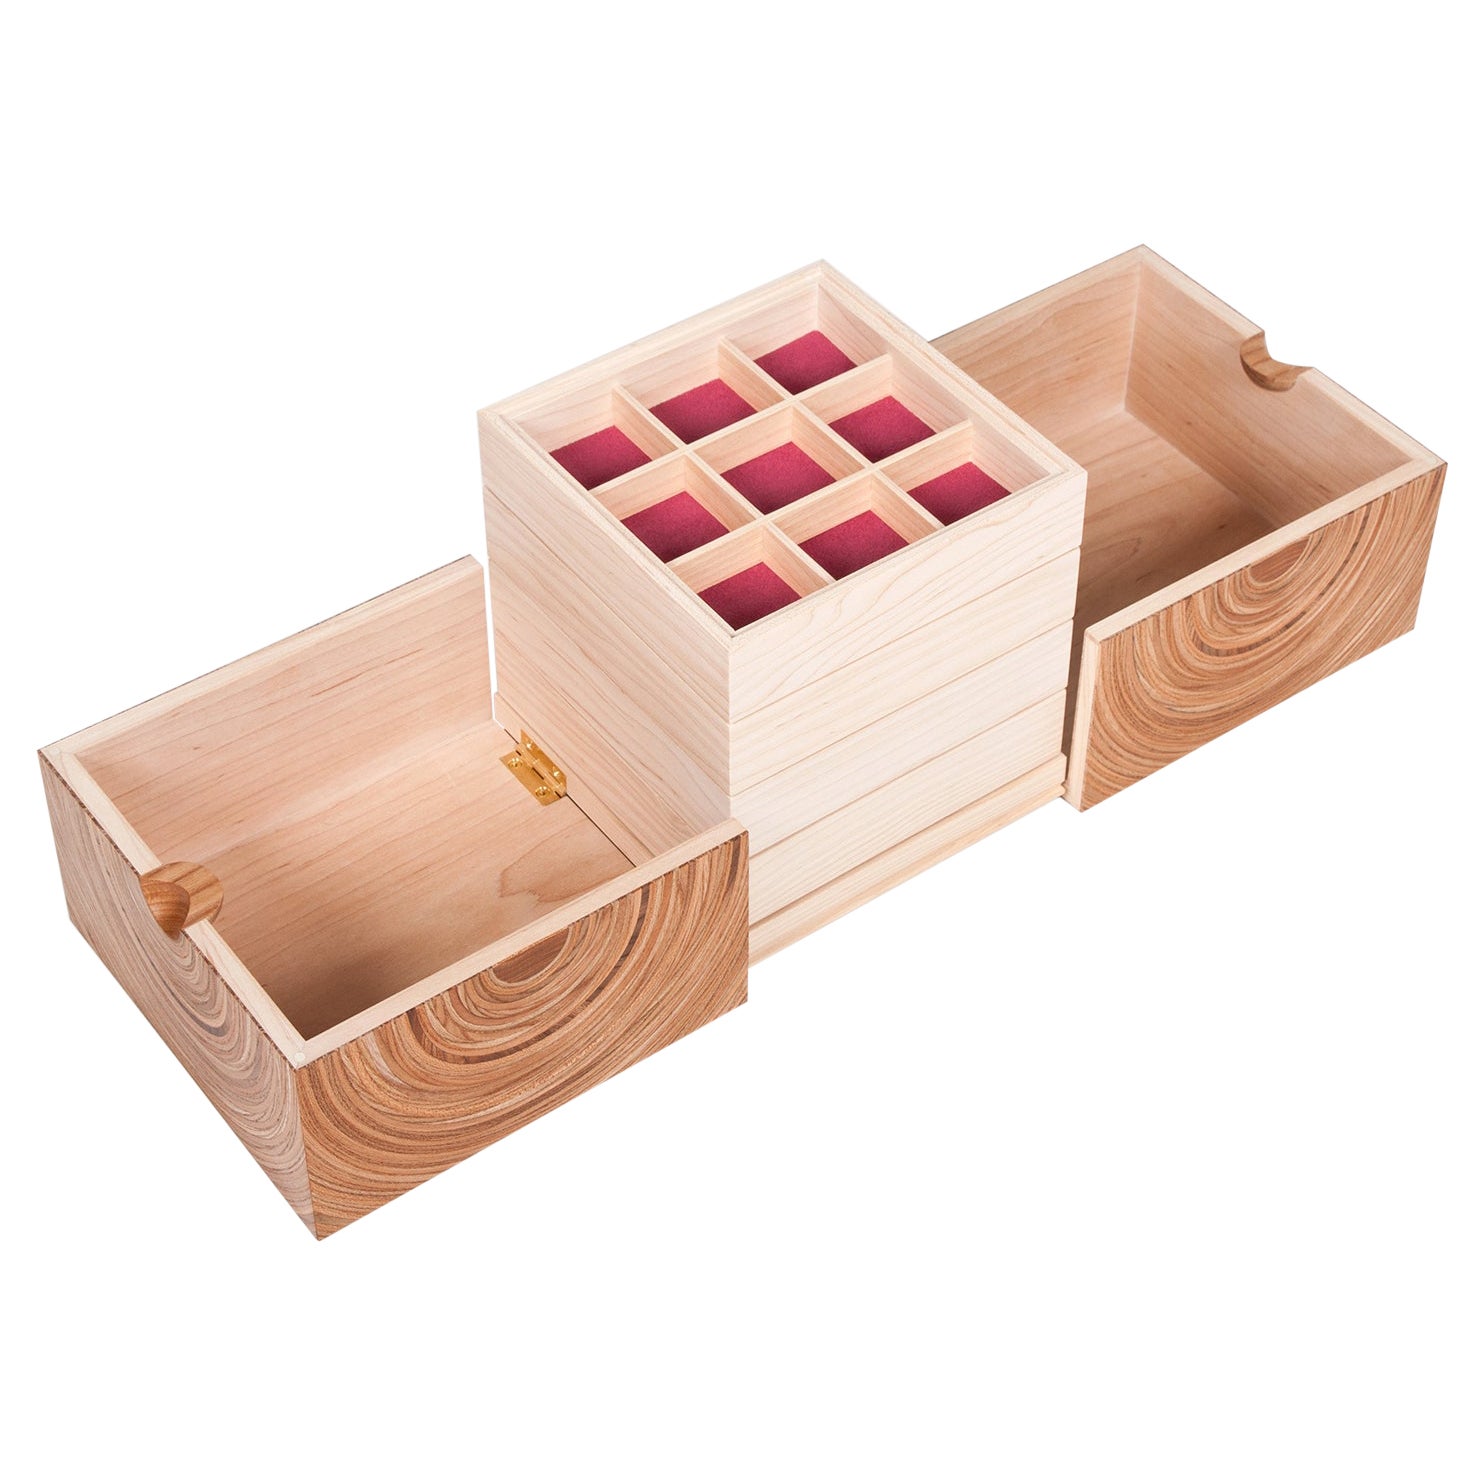 Contemporary Cubed Jewellery Box made in Elm and Maple with Magenta Fabric For Sale